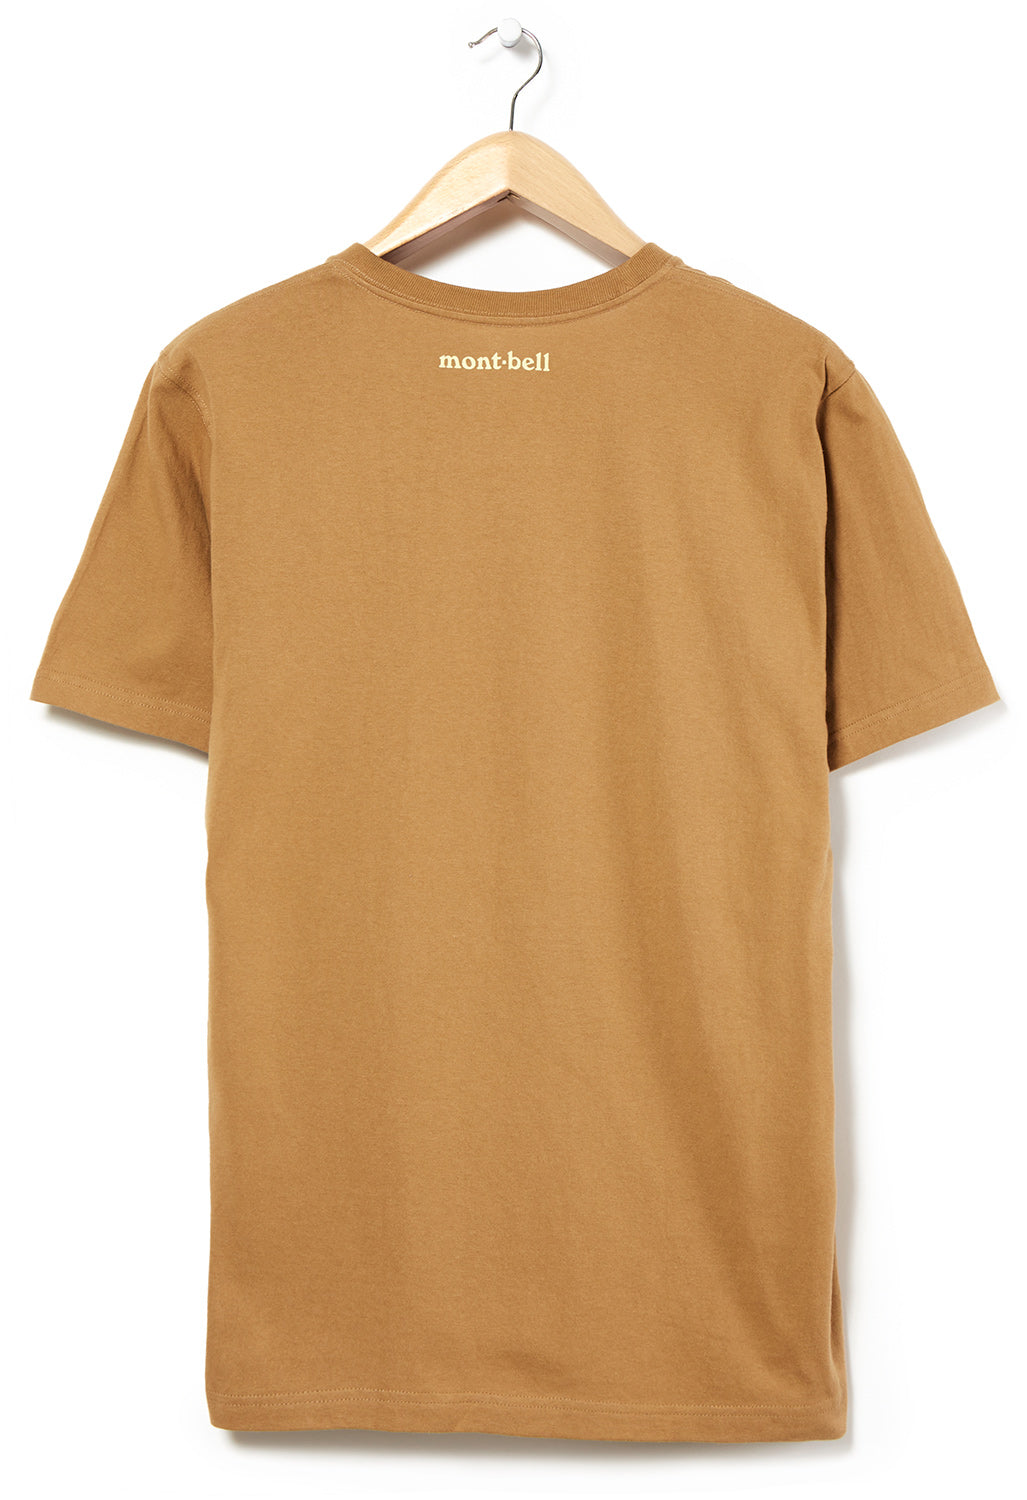 Montbell Pear Skin Cotton mont-bell Iwa Logo T-Shirt - Brown